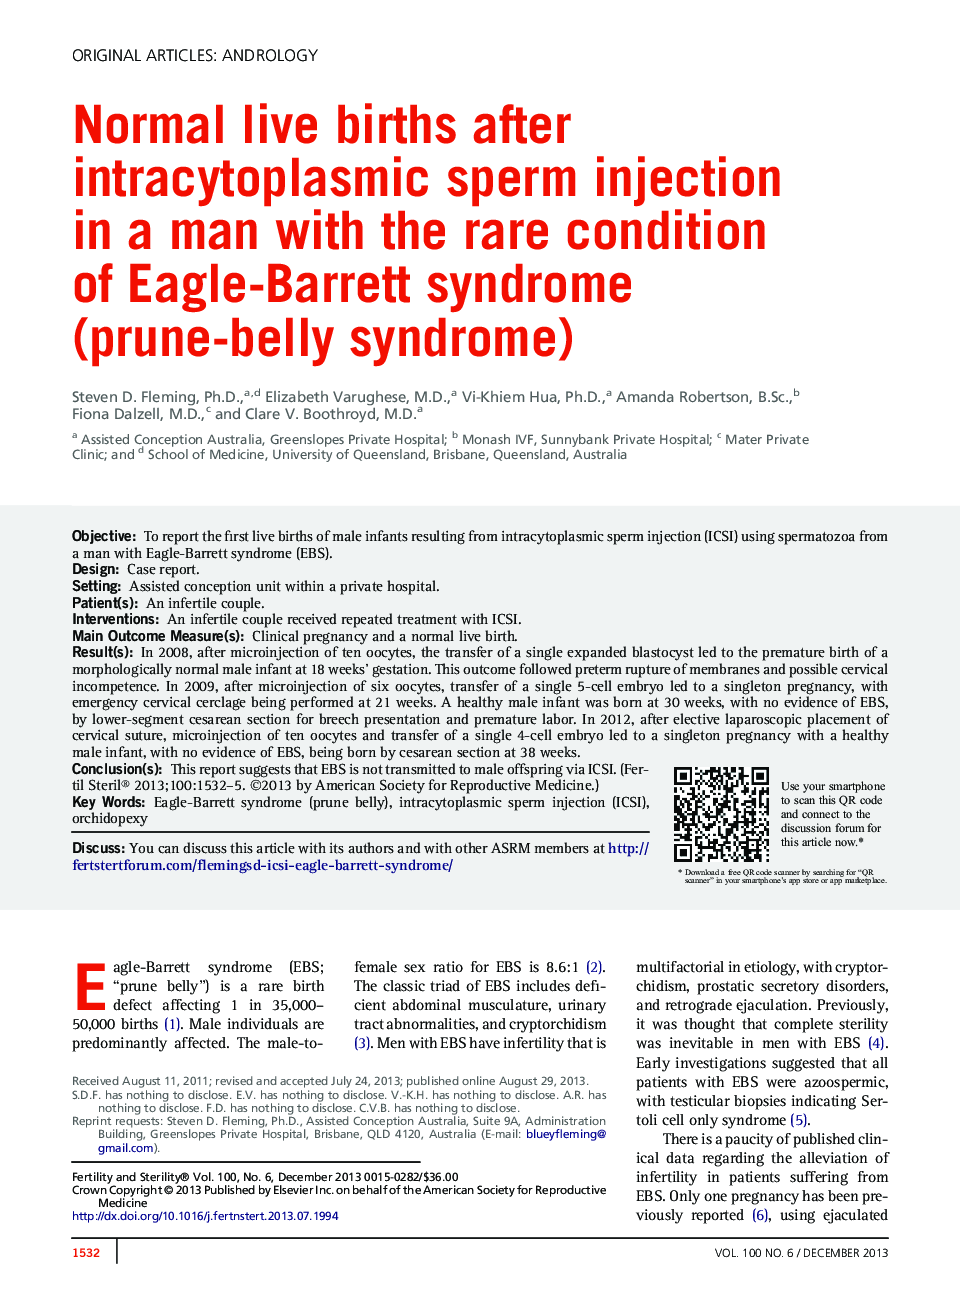 Normal live births after intracytoplasmic sperm injection in a man with the rare condition of Eagle-Barrett syndrome (prune-belly syndrome) 